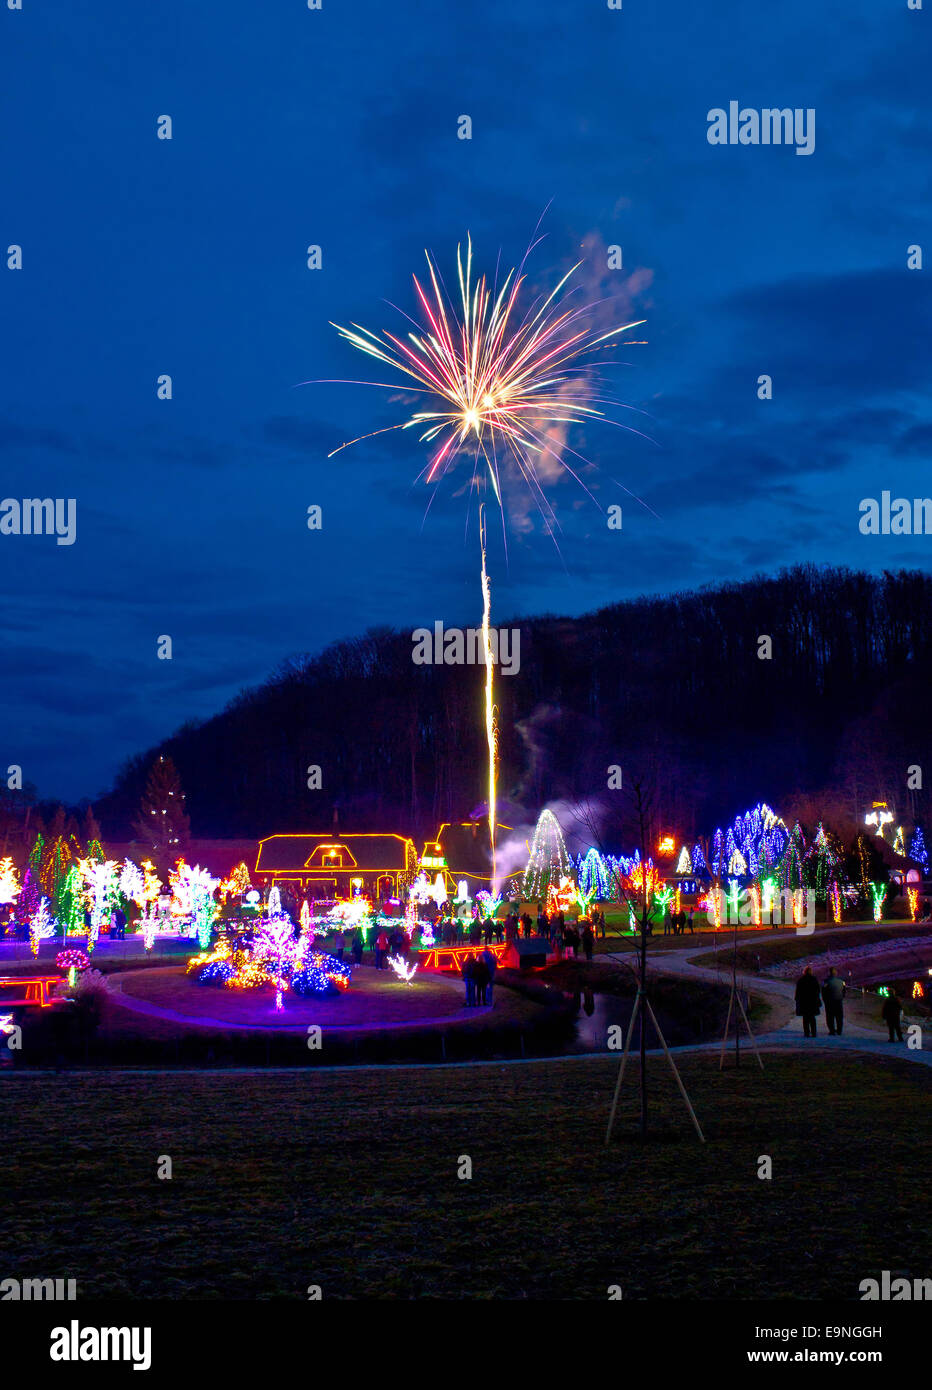 Village in Christmas lights fireworks Stock Photo